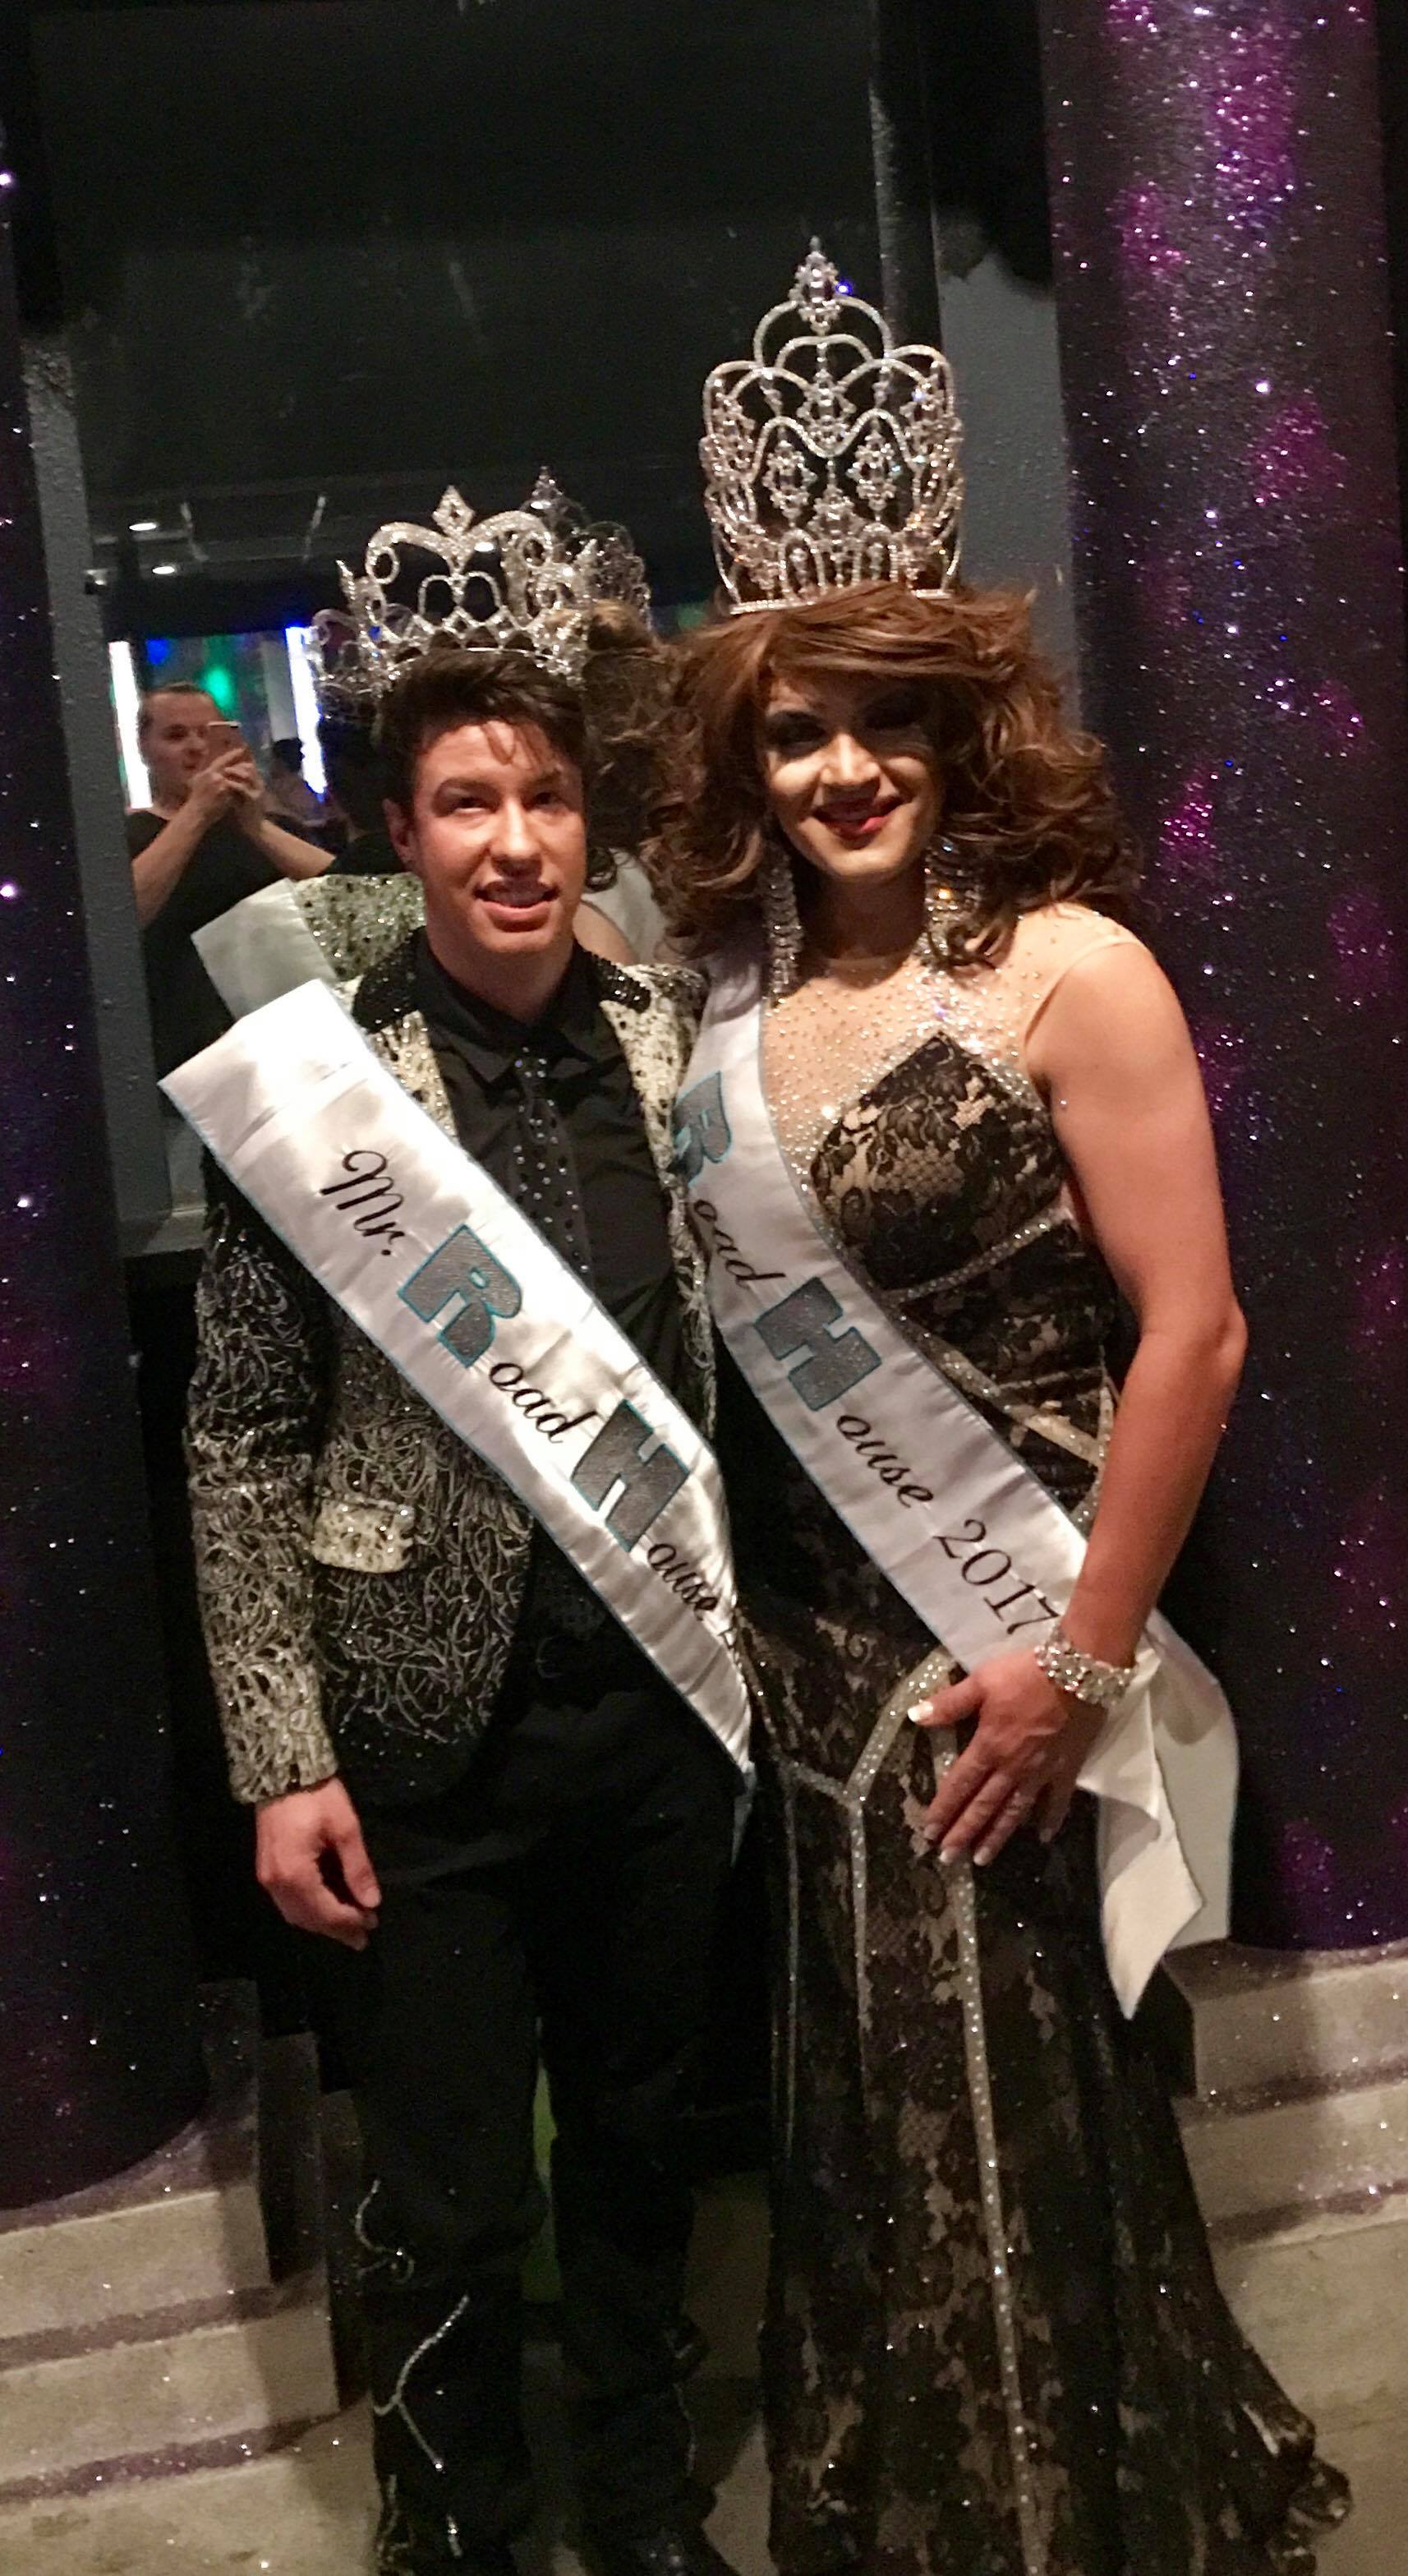 Michael Kane (Mr. RoadHOuse 2017) and Katie Love (Miss RoadHouse 2017) at RoadHouse Bar in Cookeville, Tennessee.